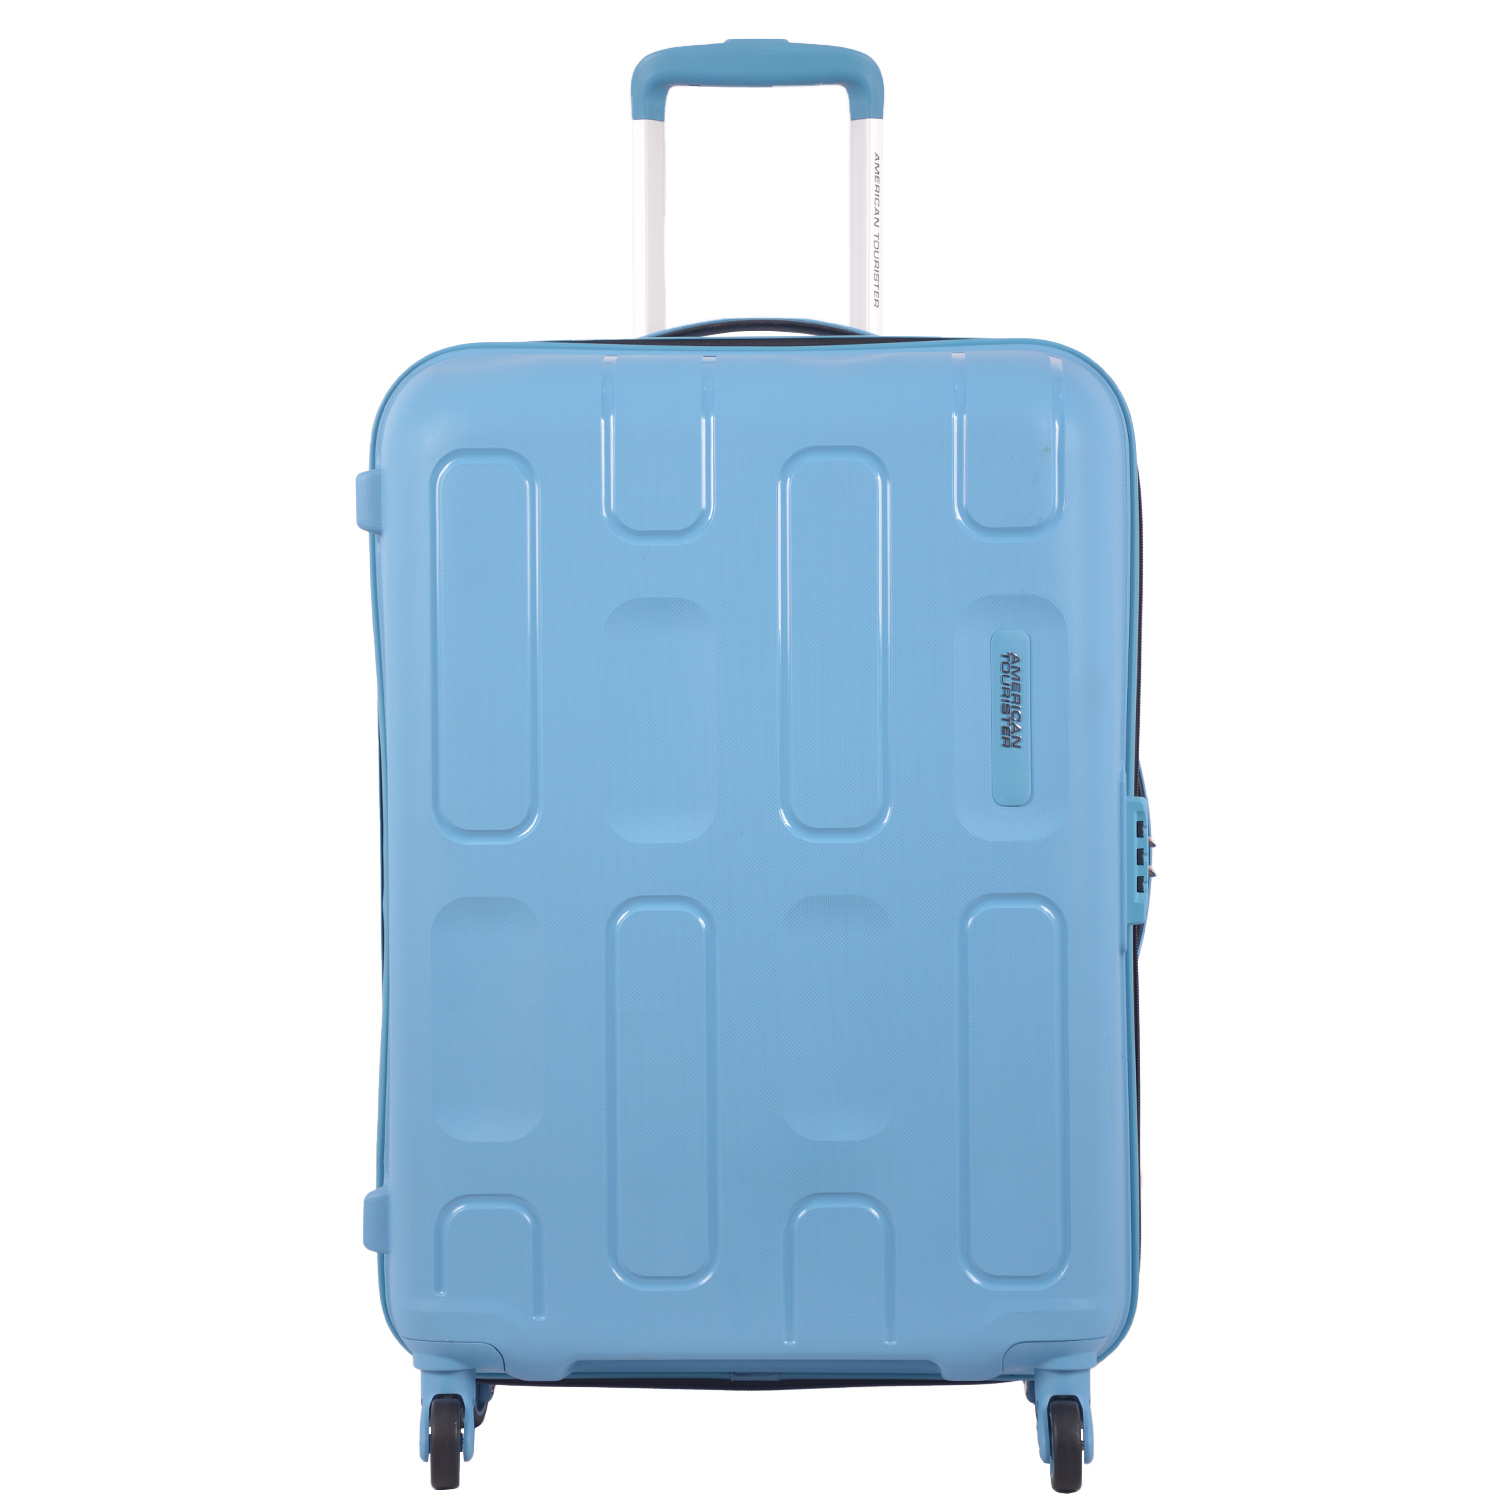 RoshanBags_AMERICAN TOURISTER ELLIPSO STROLLY BLUE